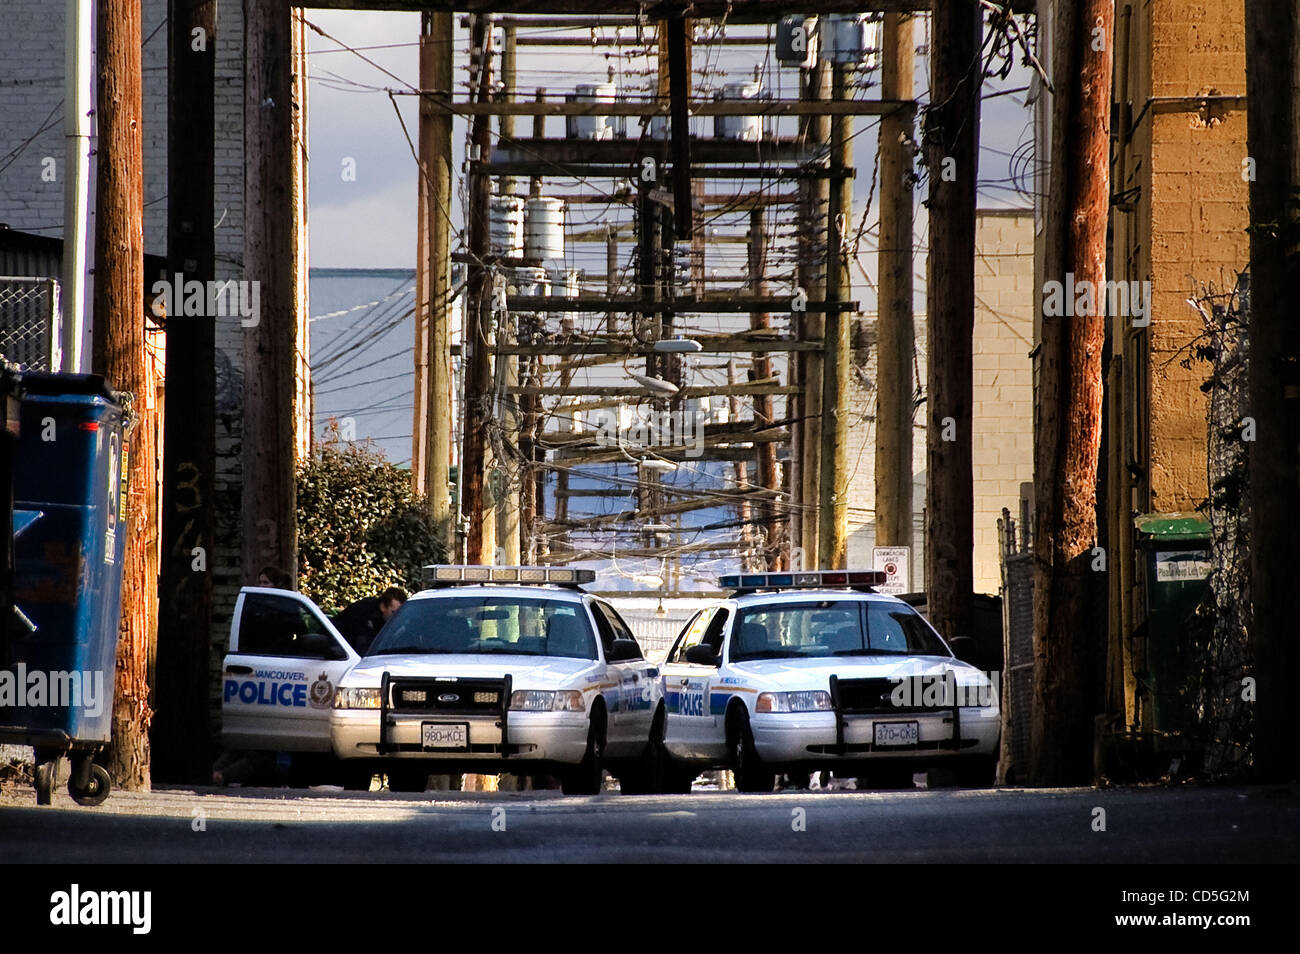 Jun 12, 2008 - Vancouver, British Columbia, Canada - Squad cars on an alleyway drug raid. The Vancouver Police Department has a high-profile branch half a block from the dangerous crossroads of Hastings and Main. The Downtown Eastside has always been the center of Vancouver's hard drug trade. In fac Stock Photo